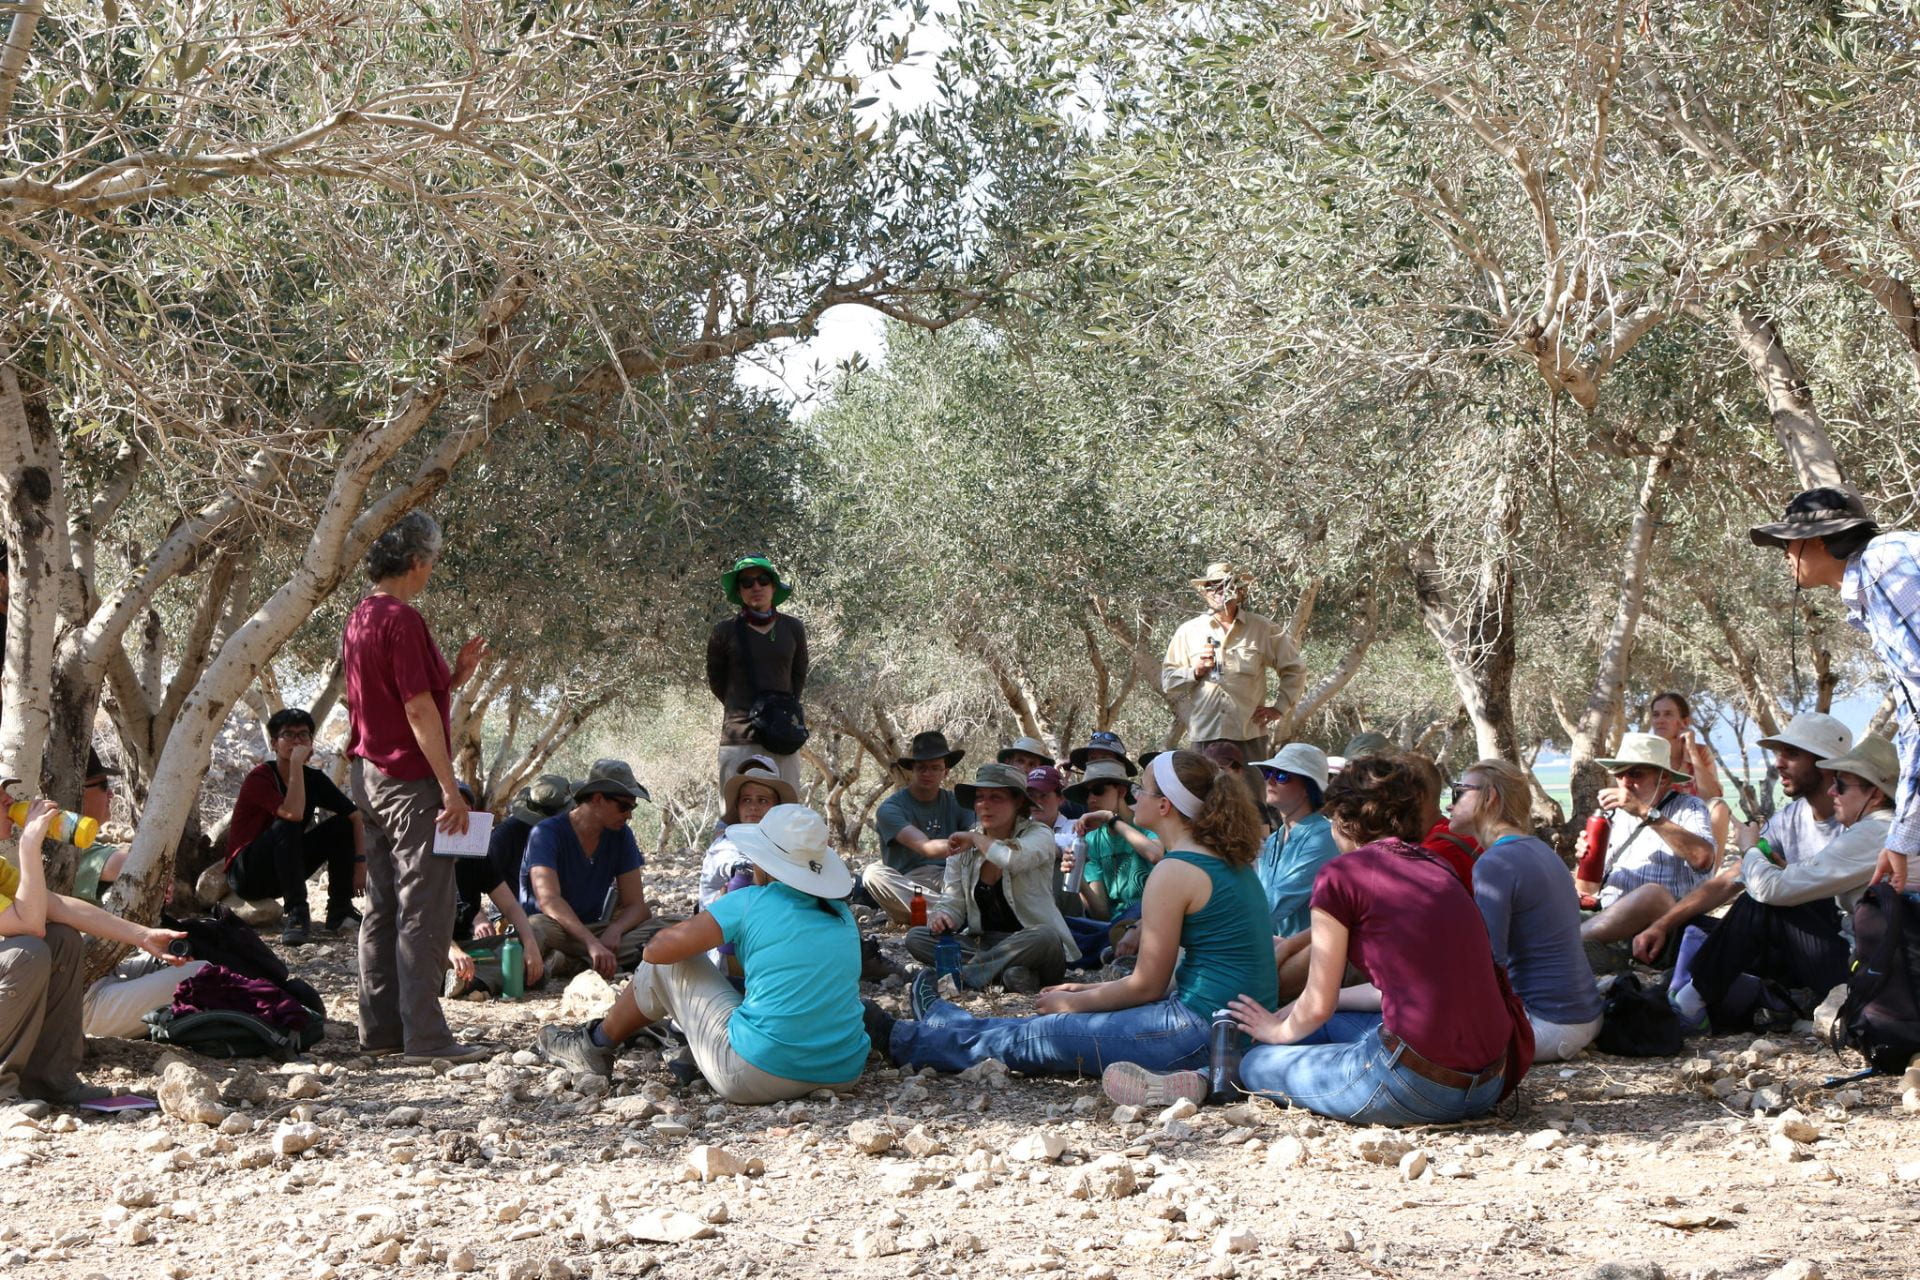 Orientation in the olive grove with field director Liz Bloch-Smith